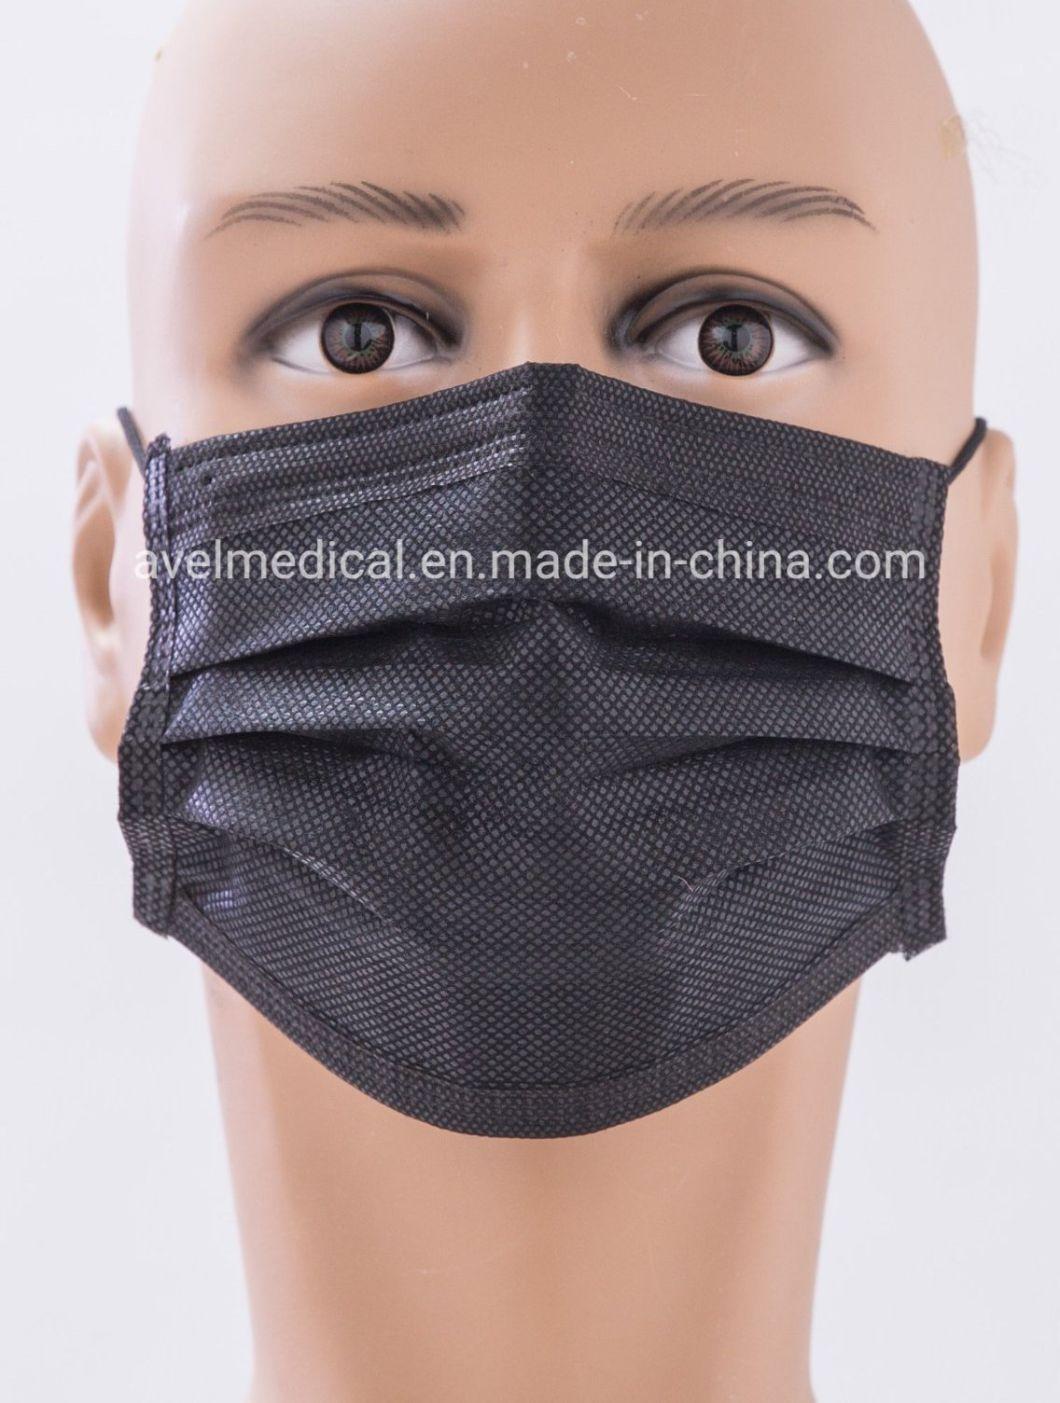 Supplier of Surgical Medical Face Mask Disposable Protective Earloop 3ply Bfe Pfe Vfe 99% CE En14683 Type Iir ASTM Level 3 White List Mask